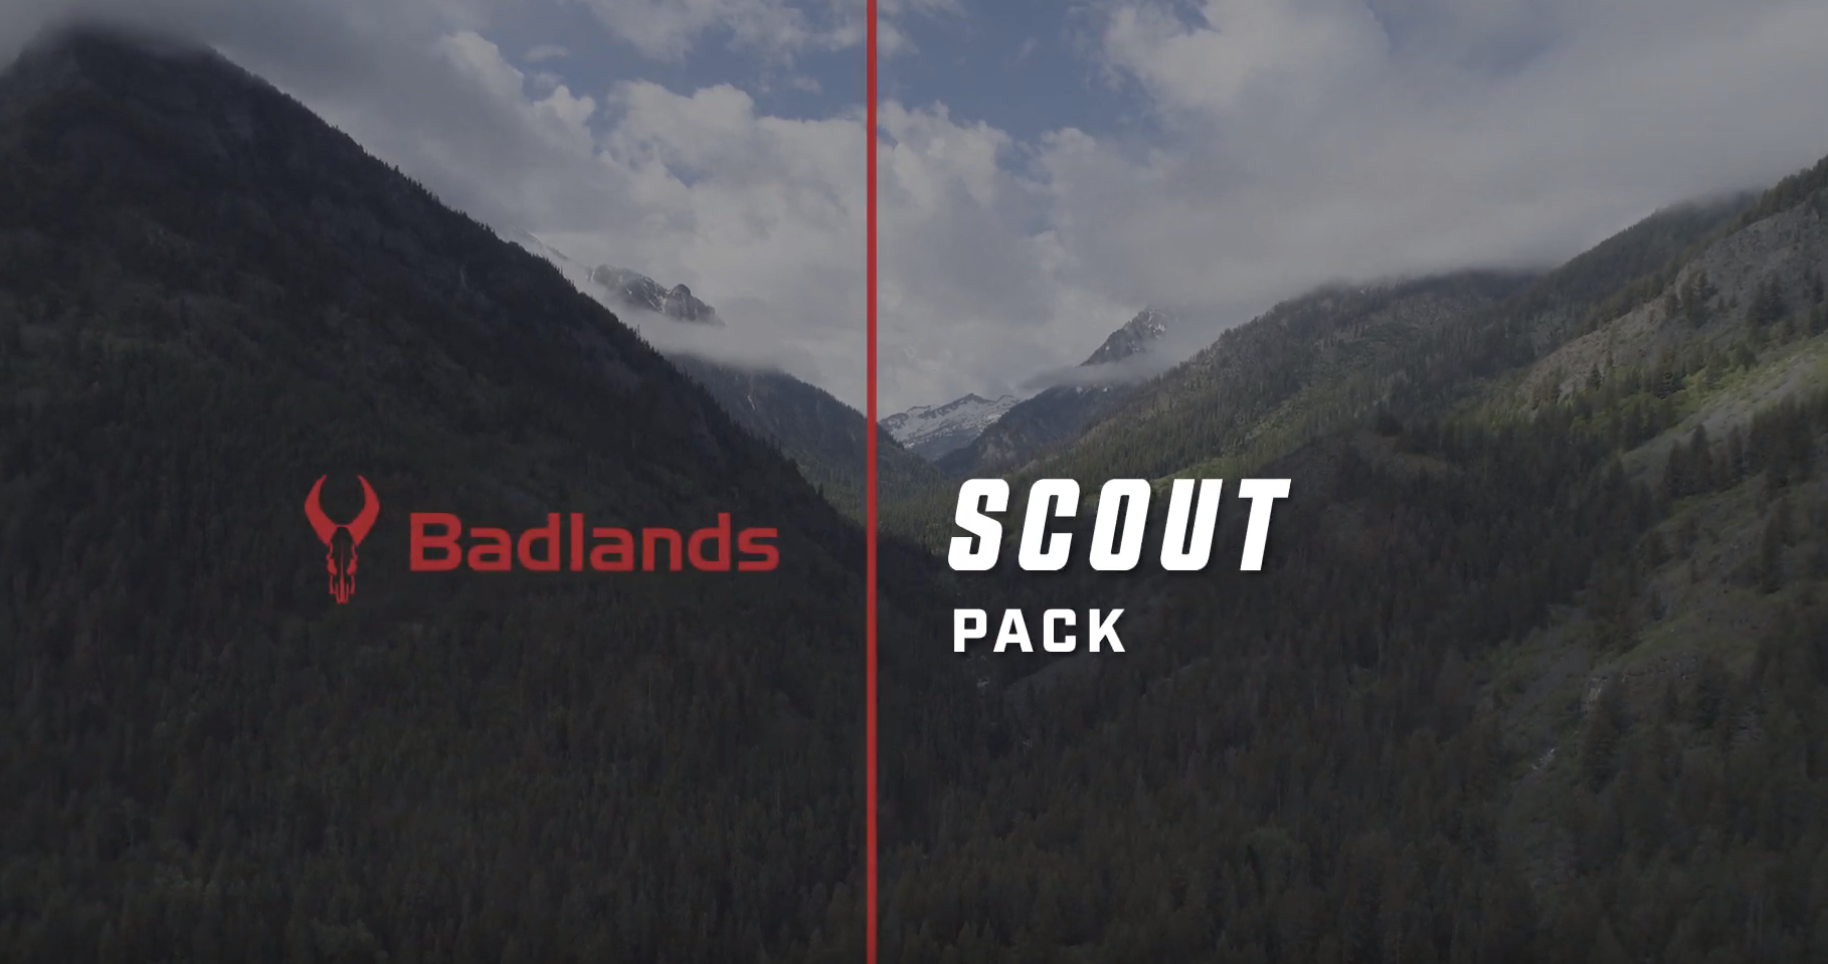 Learn more about the Scout Pack